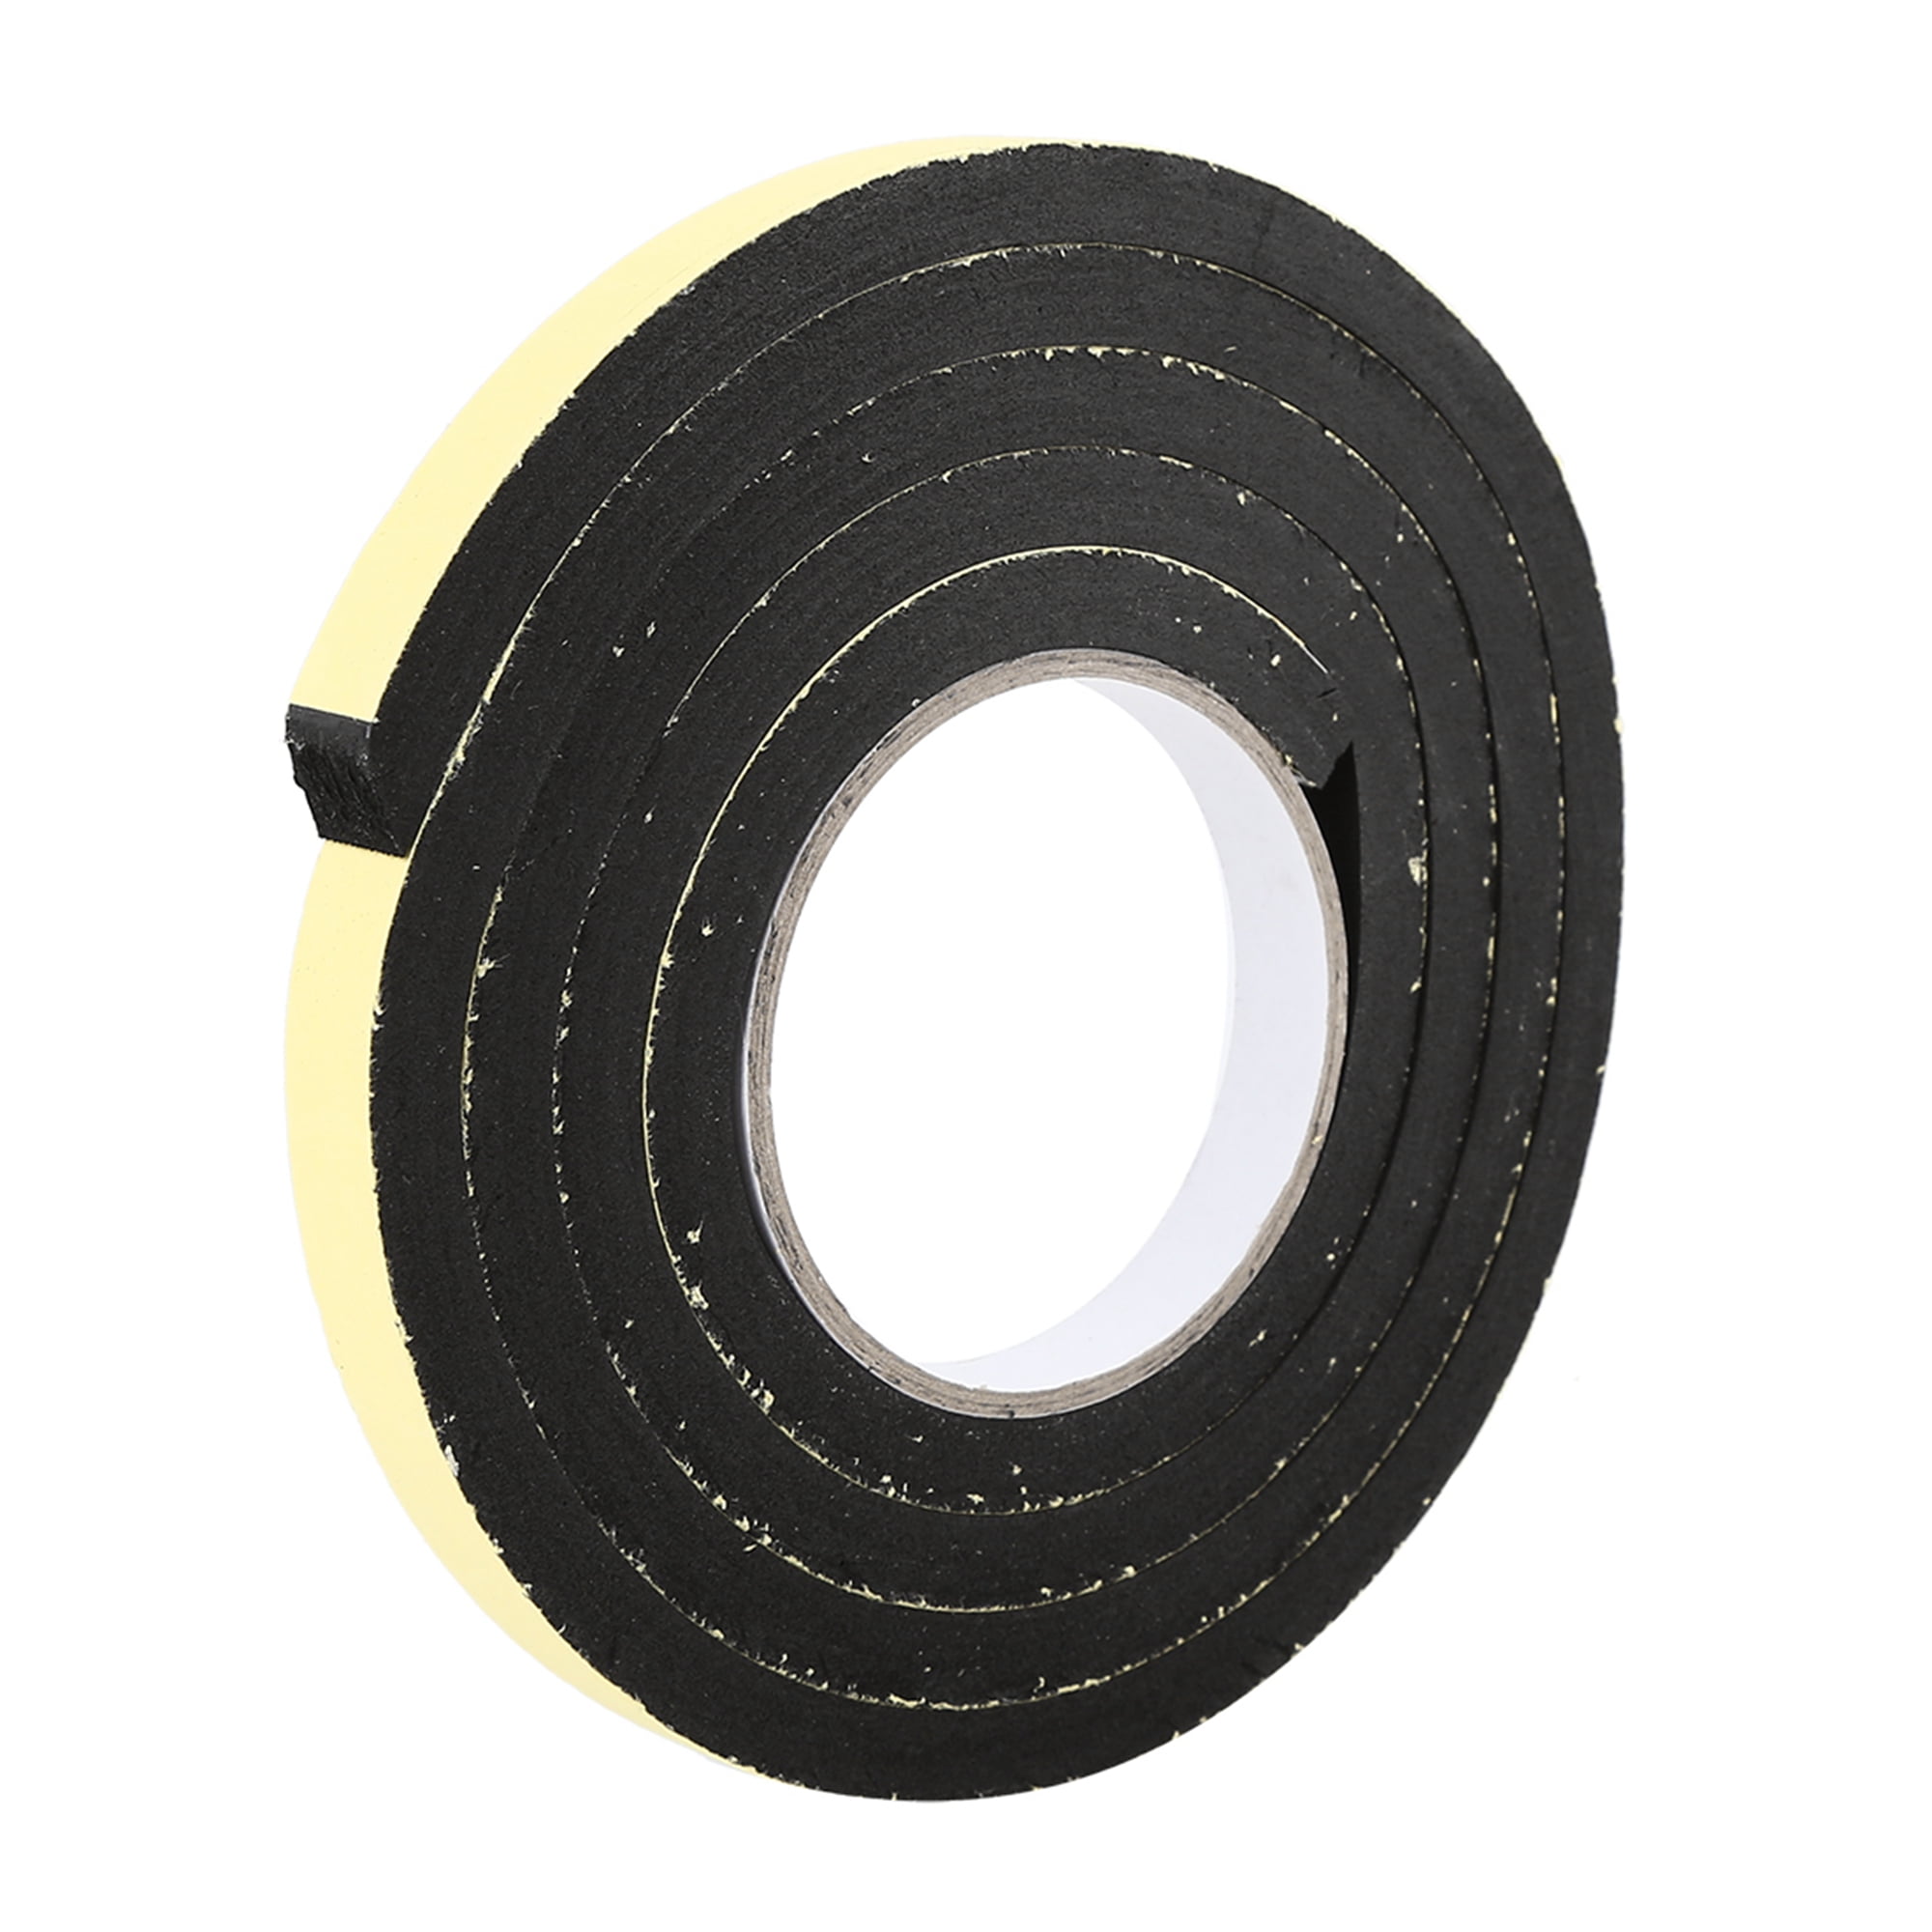 Single Sided Foam Tape Self Adhesive Extra Sticky Backed Gasket Seal Window Car 